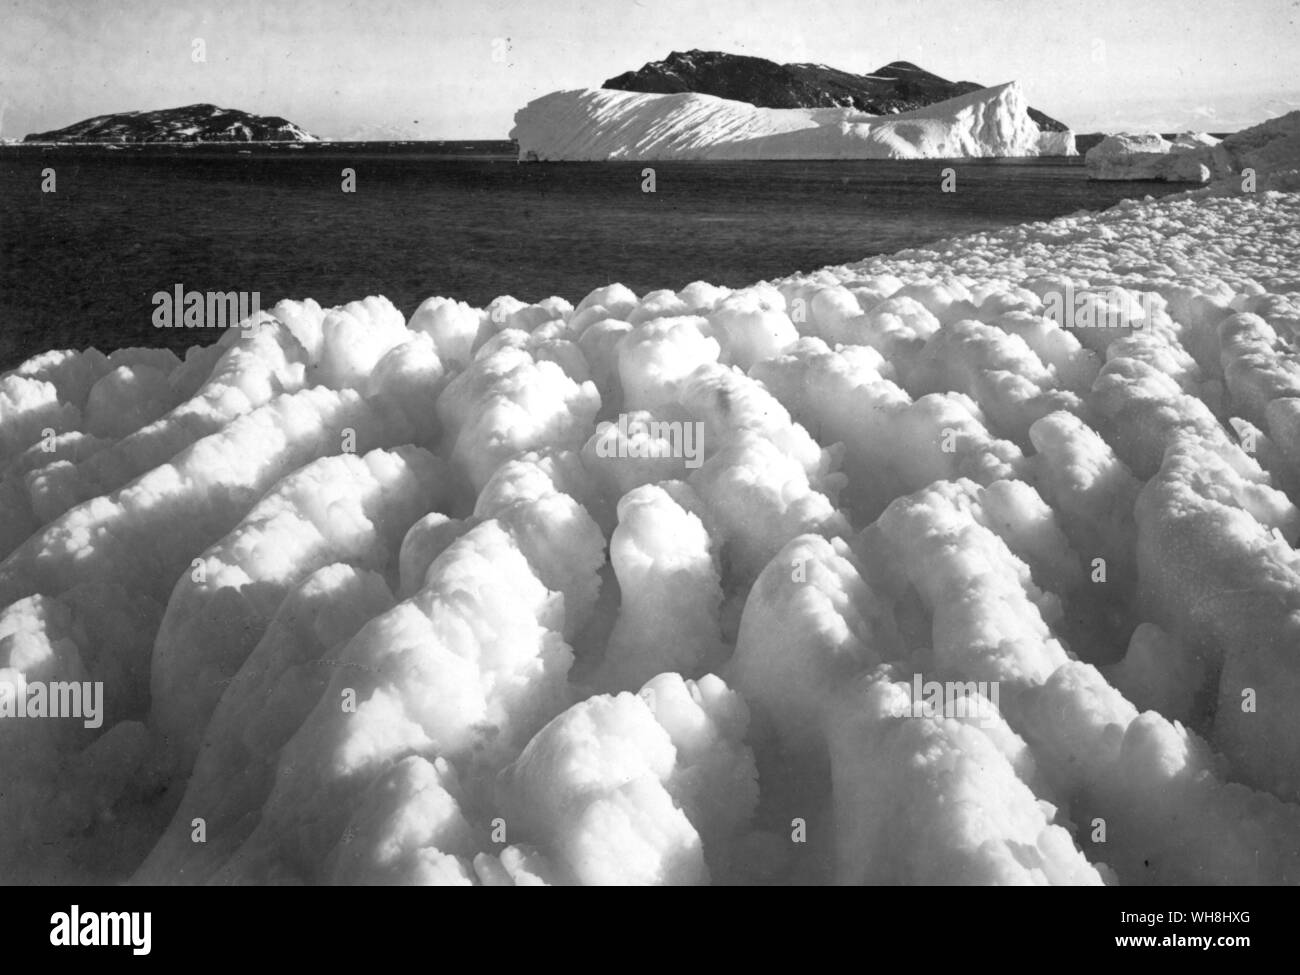 Captain Robert Falcon Scott (1868-1912), Scott's last Antarctic Expedition 1910-1912: spray ridges of ice on Cape Evans after a blizzard. In the distance Inaccessible Island, photographed by H. G. Ponting, 8 March 1911, the expedition's offical photographer. Antarctica: The Last Continent by Ian Cameron, page 16. Stock Photo